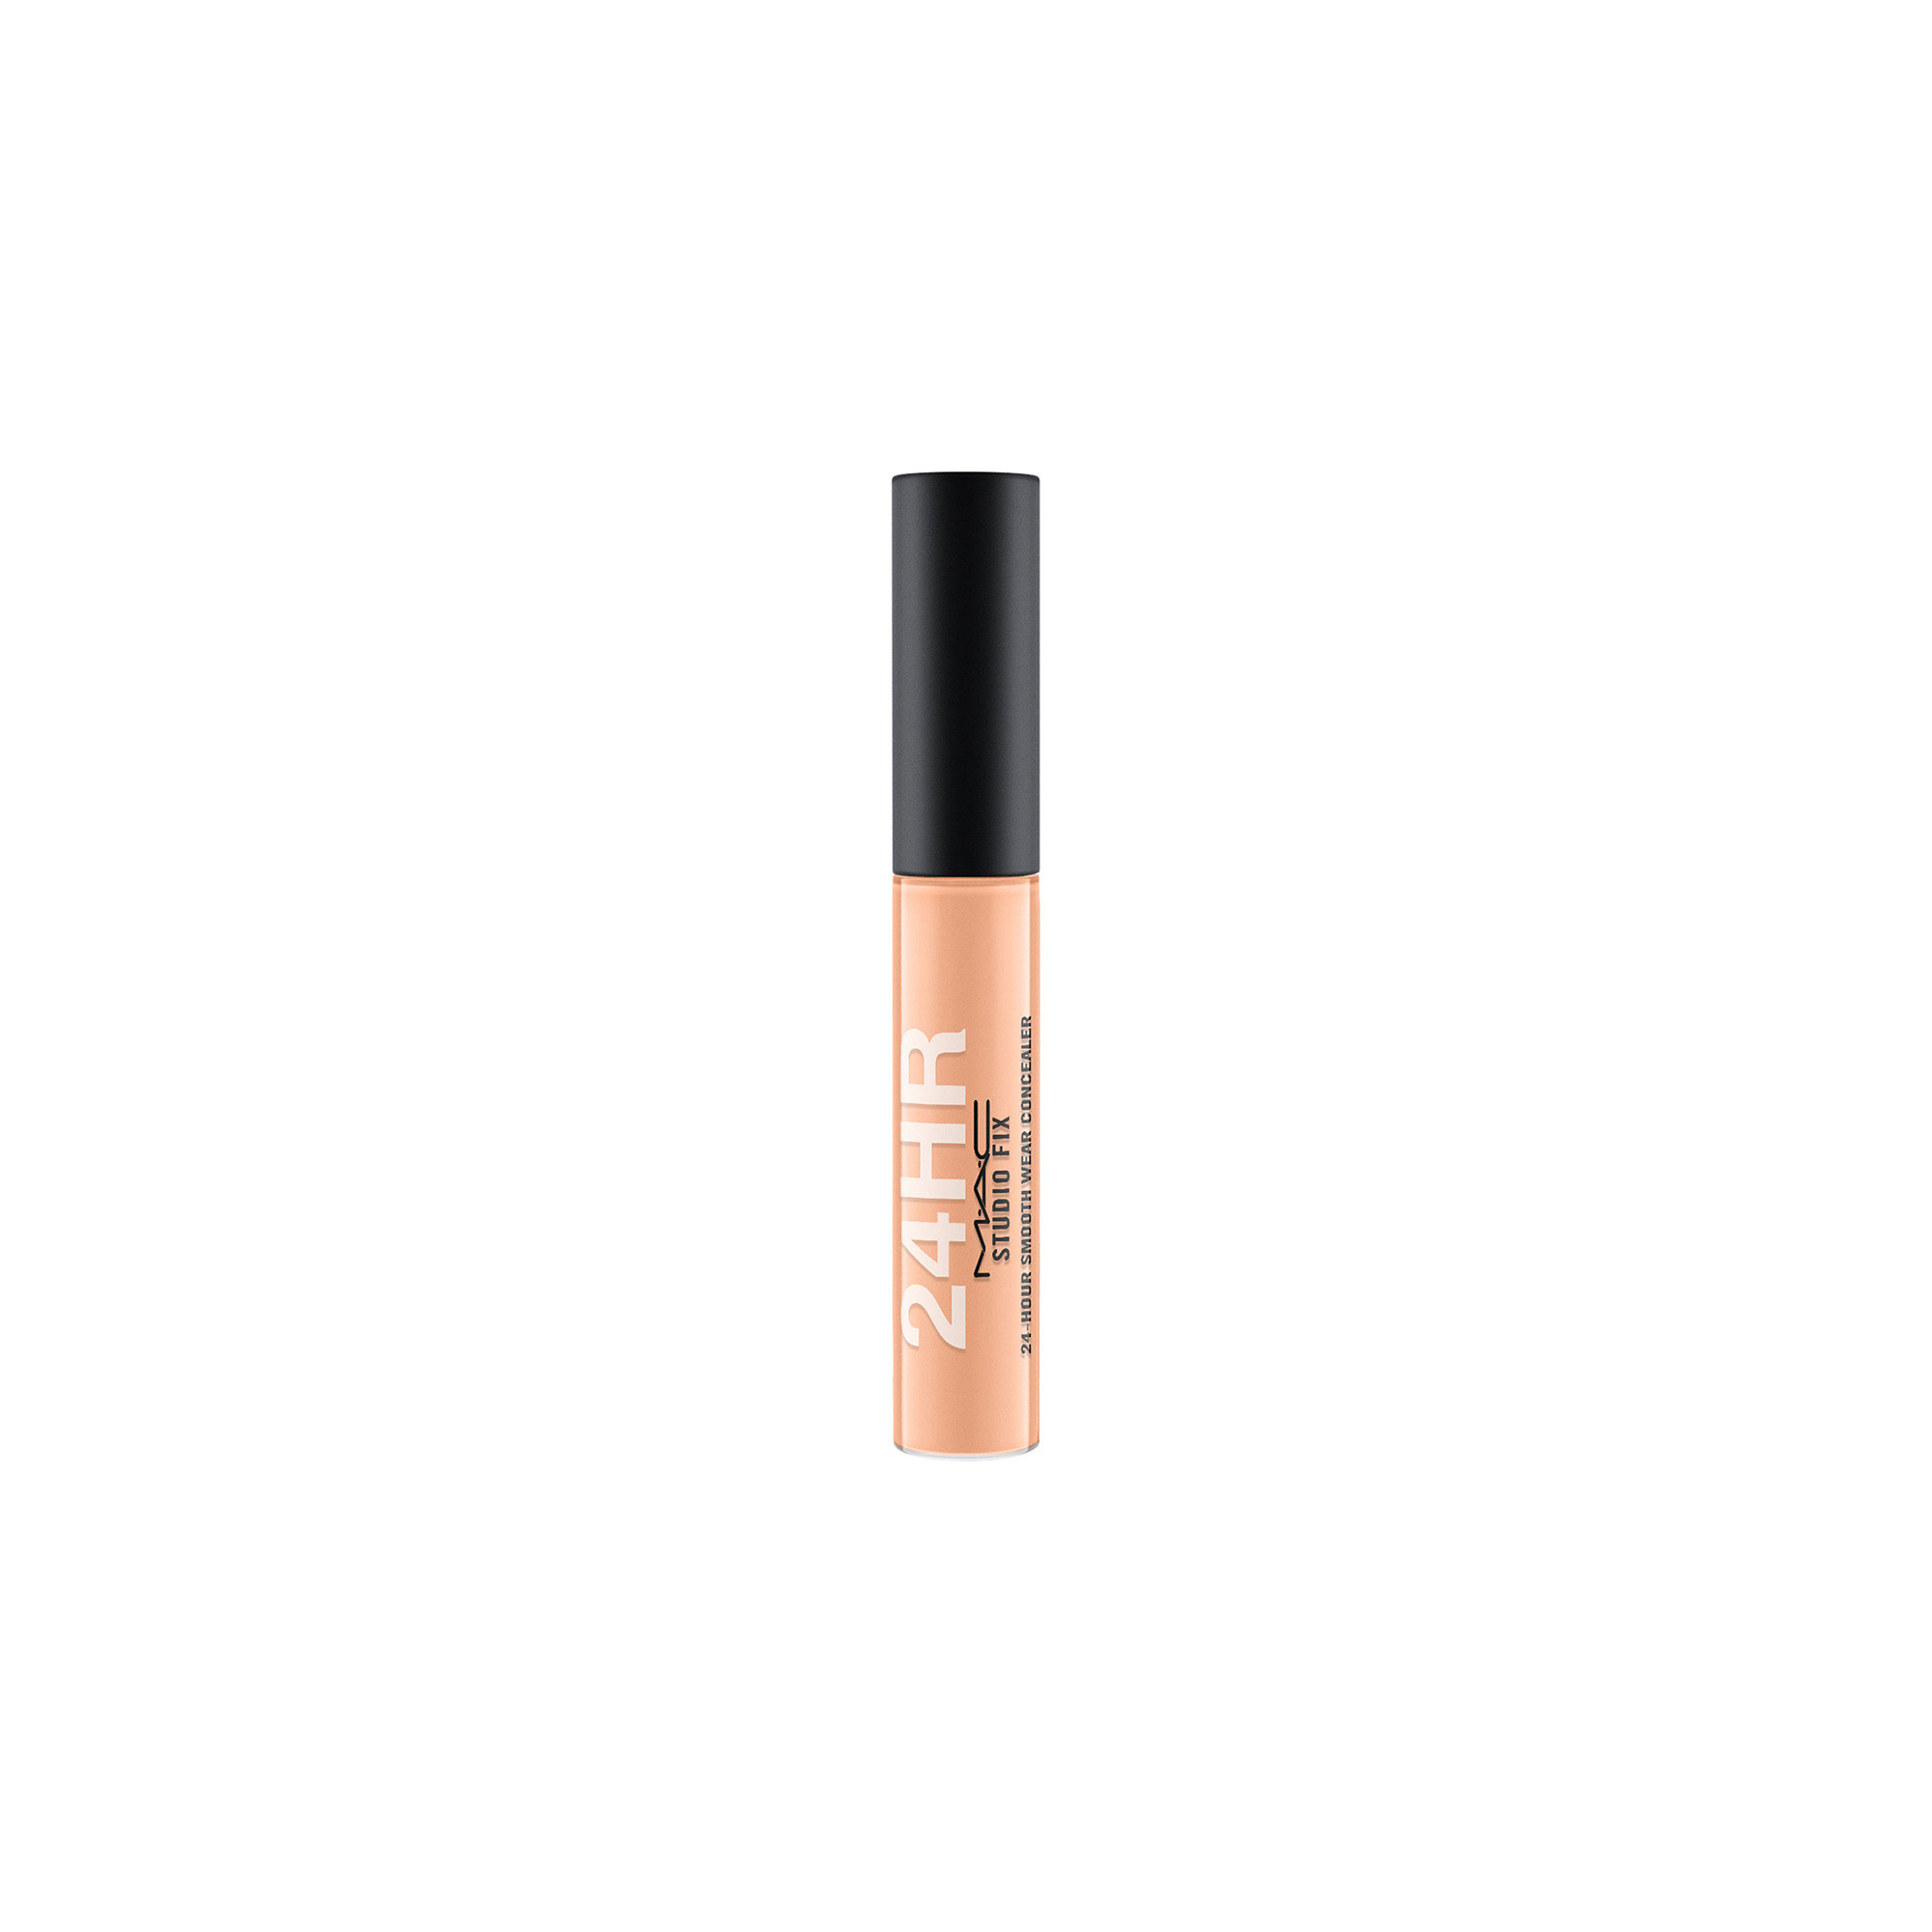 Studio Fix 24H Concealer - NW34, NW34, large image number 0